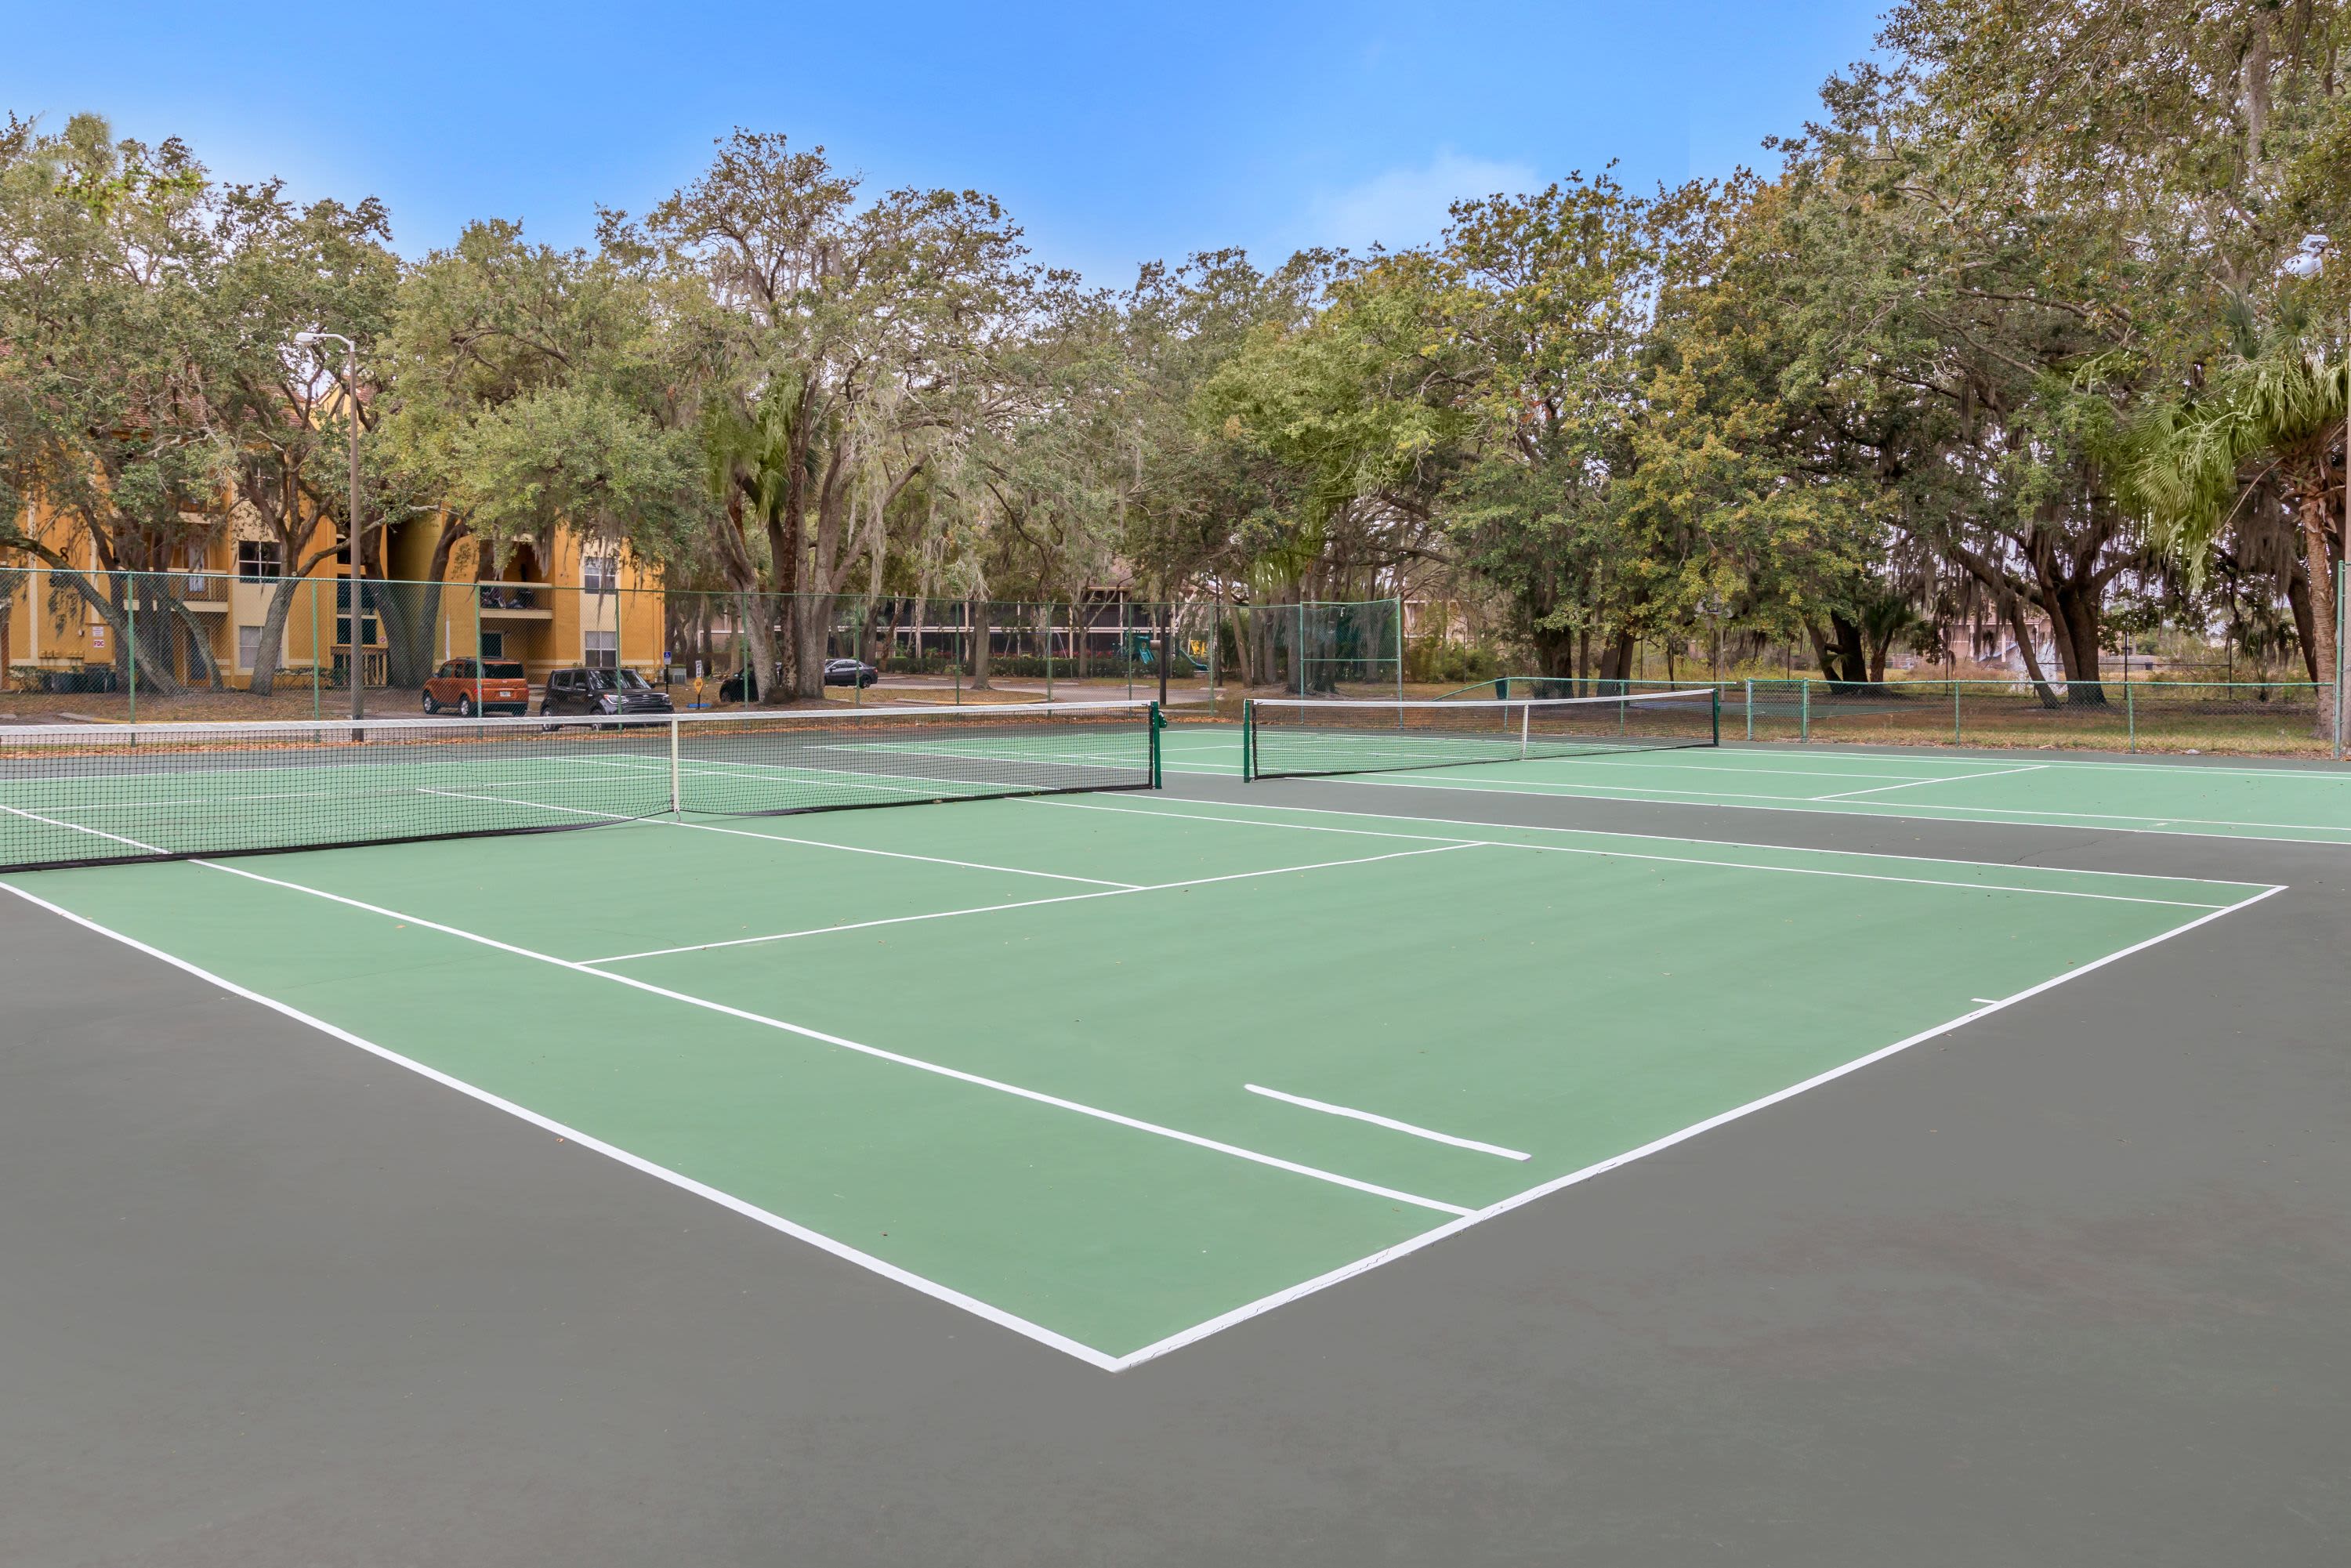 Tennis court at Images Condominiums in Kissimmee, Florida